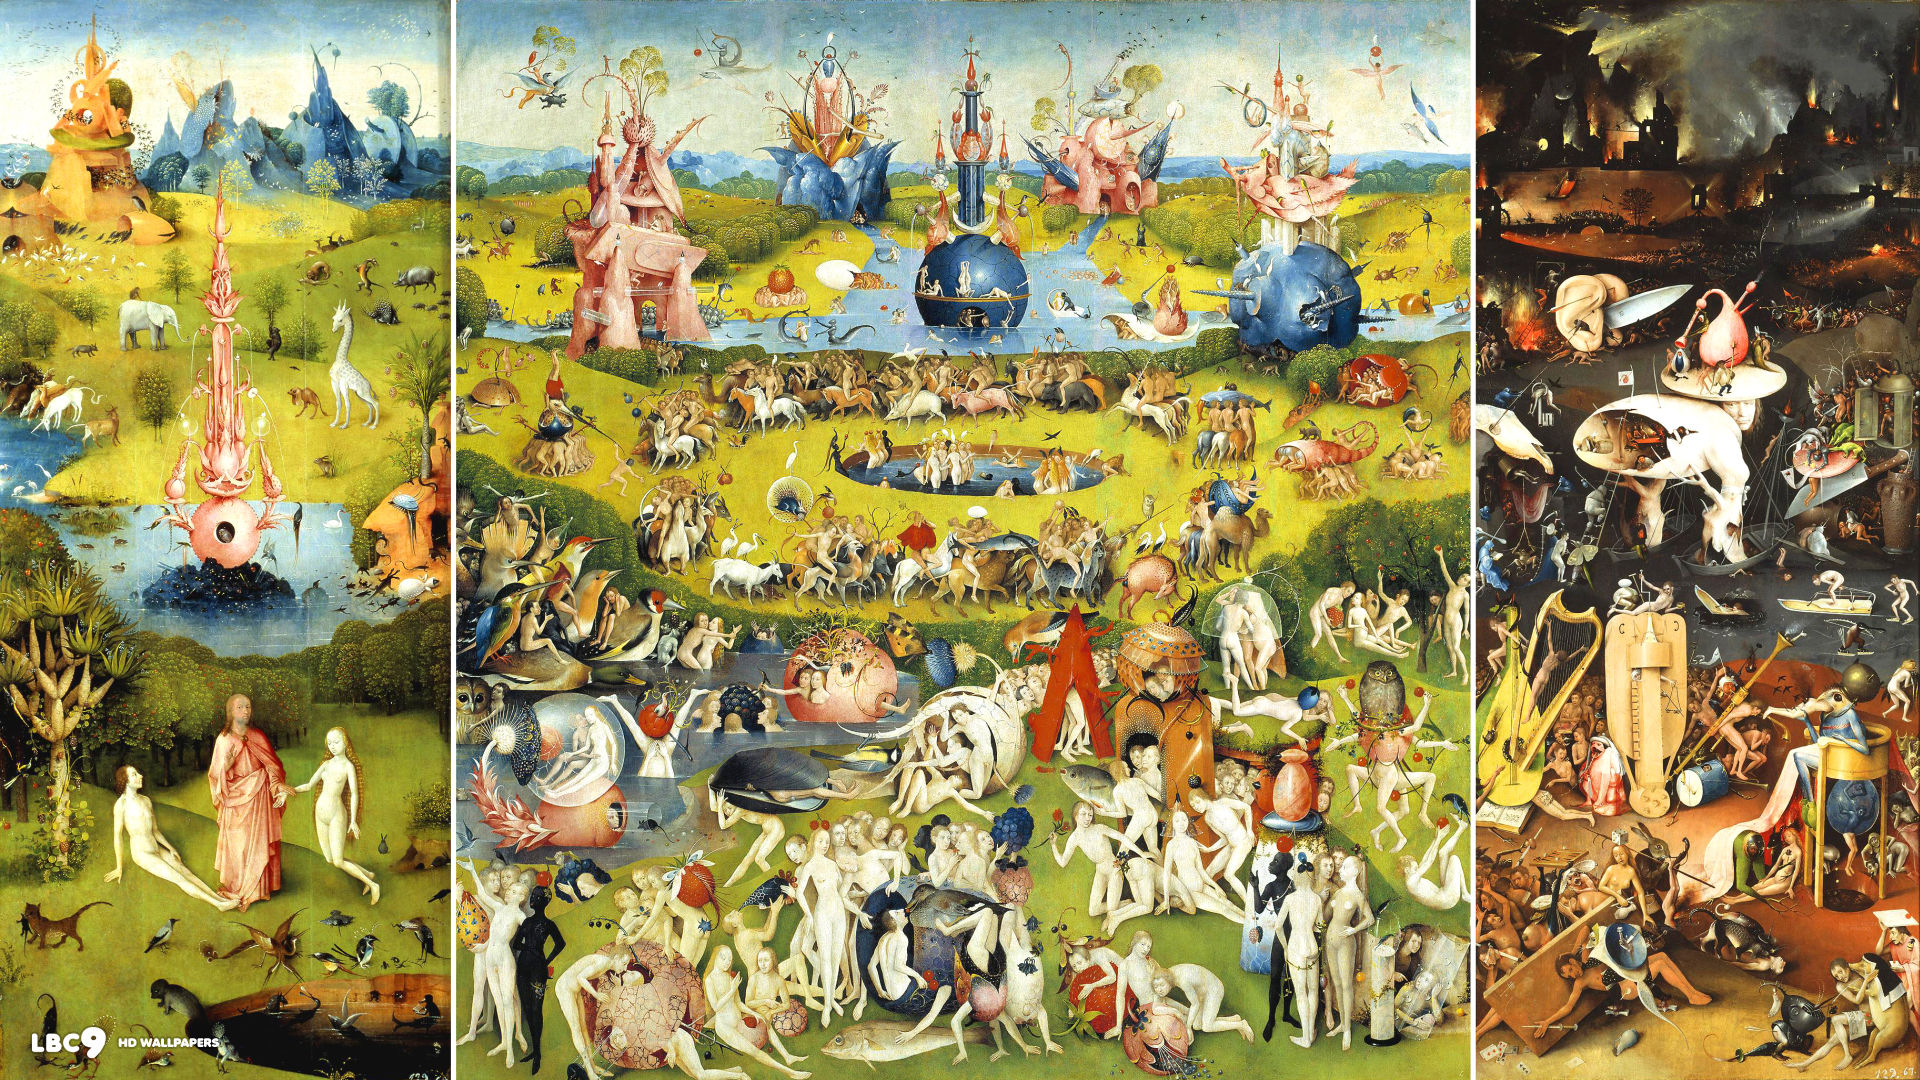 Is Right Wing of The Garden Triptych by Cradle of Filth a reference to the painting Garden of Earthly Delights by Hieronymus Bosch